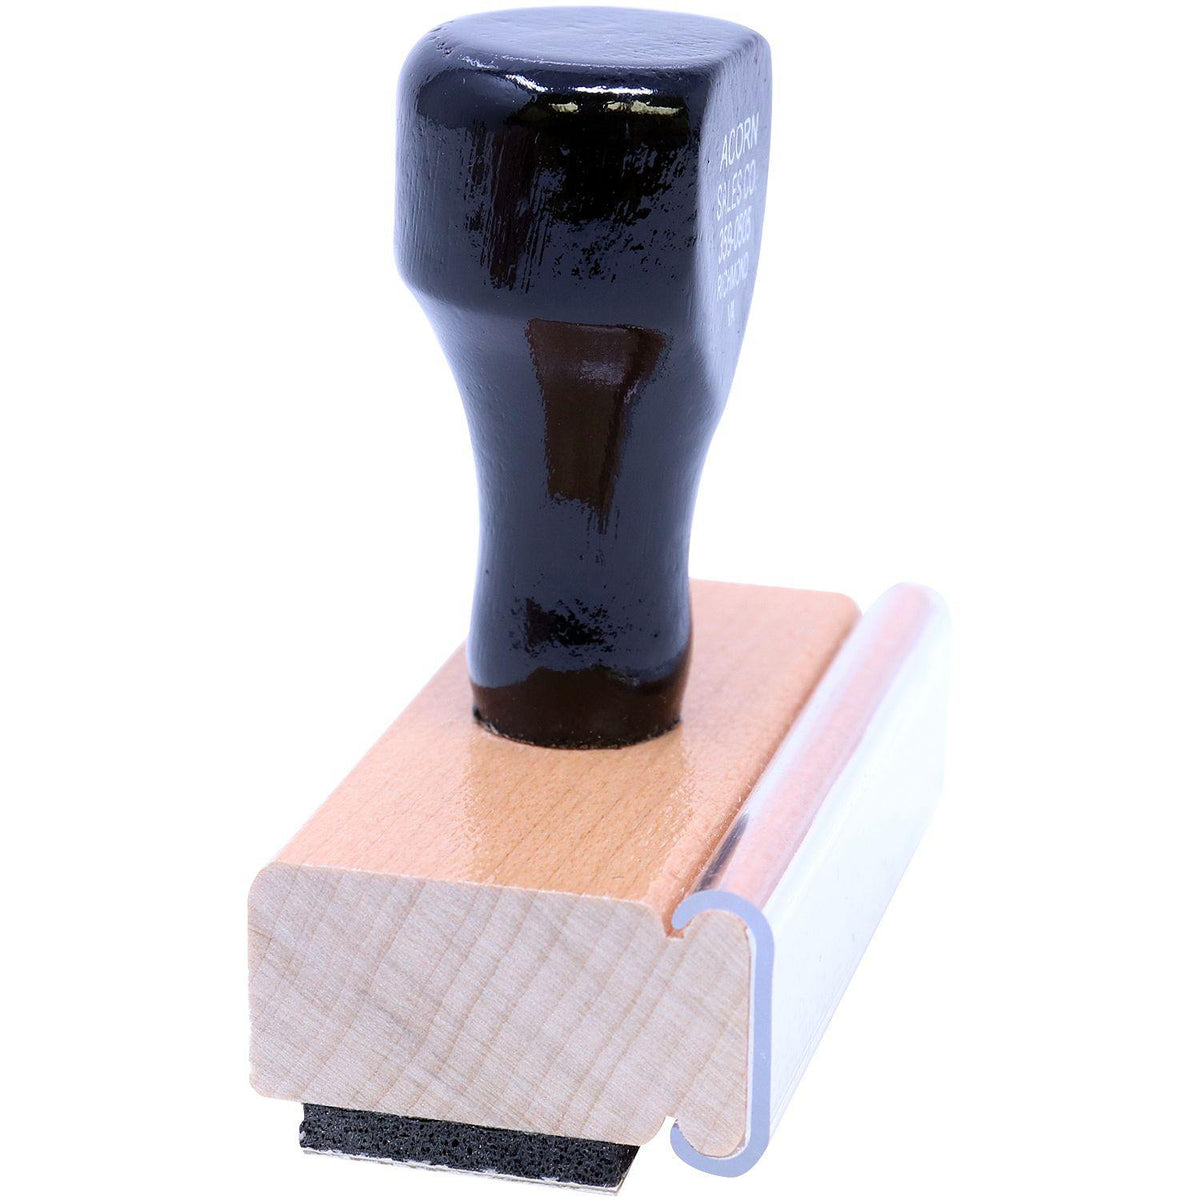 Side View of Bold Priority Rubber Stamp at an Angle